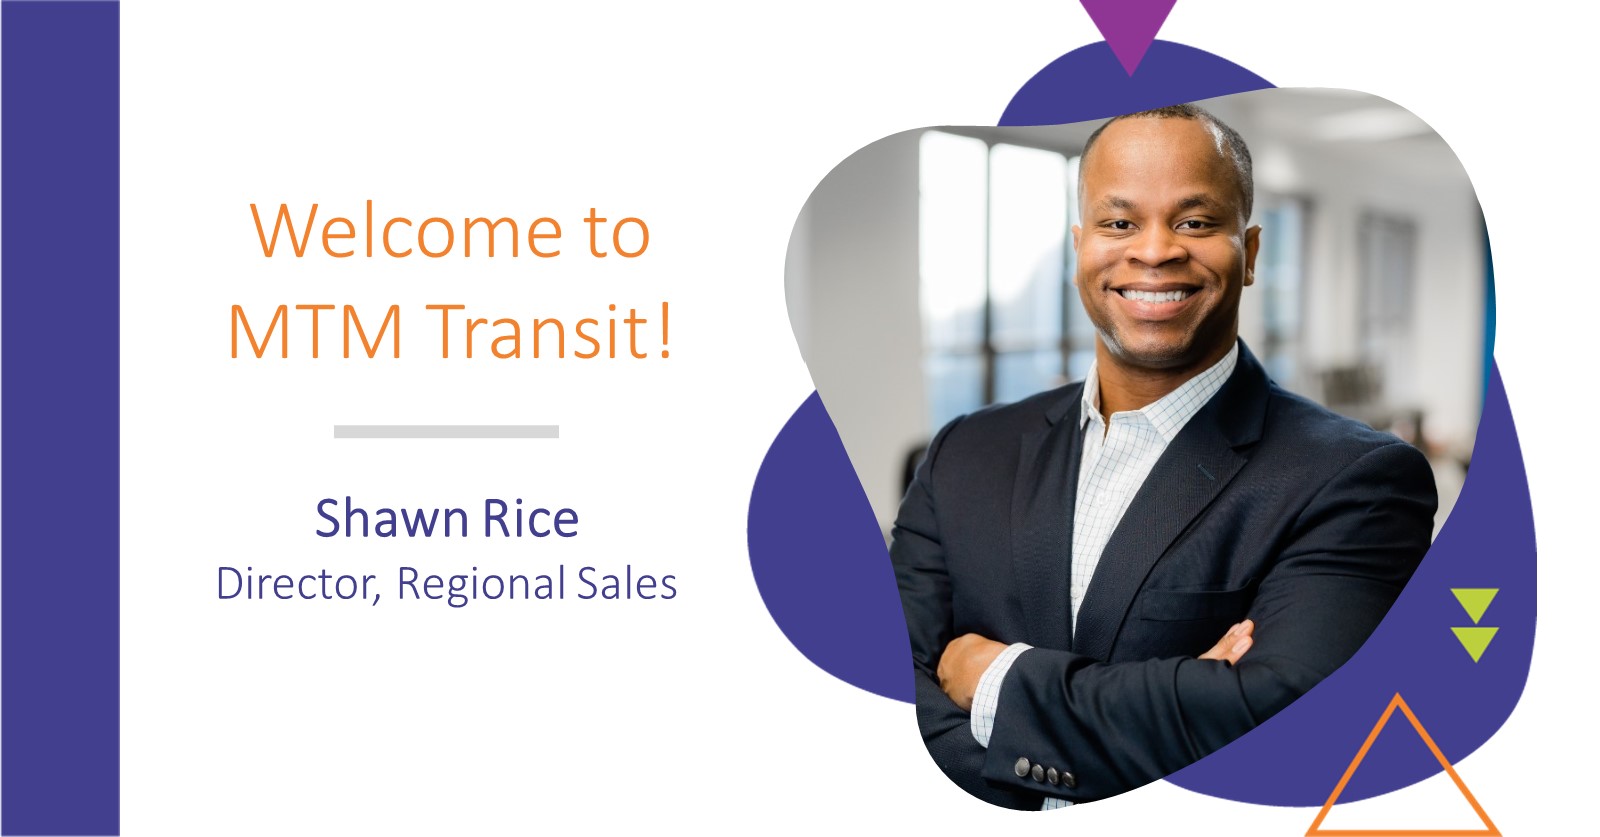 MTM Transit recently welcomed a new addition to our strategic sales team: Director, Regional Sales Shawn Rice. Meet Shawn, a results-driven leader with a long-term history of success in partnering with transit agencies to solve their most complex challenges!